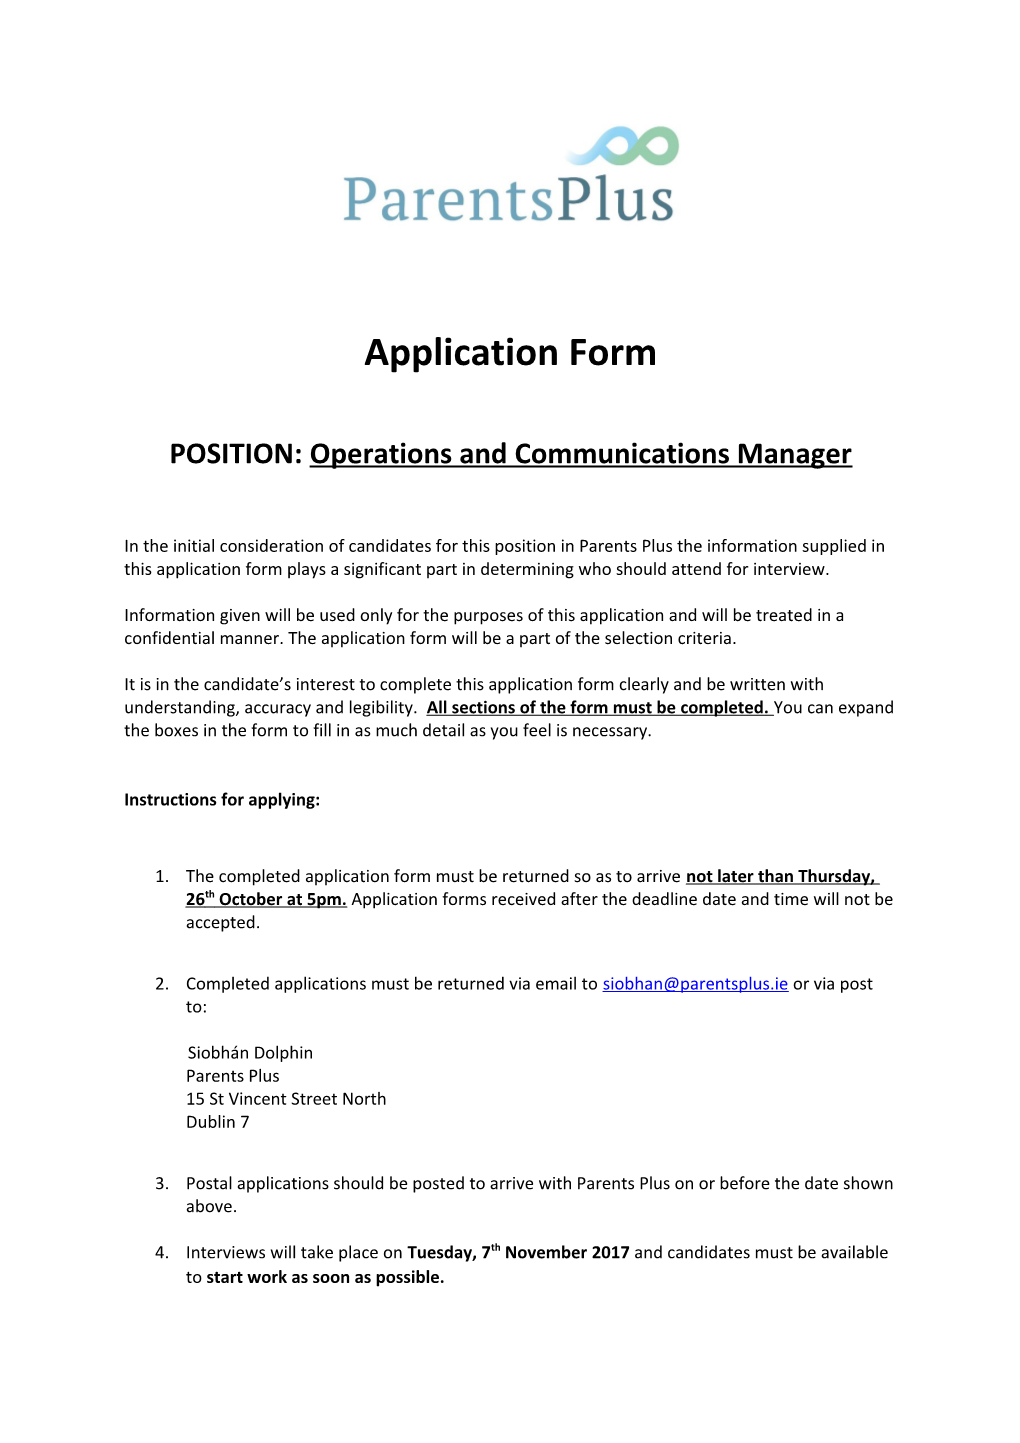 POSITION:Operations and Communications Manager